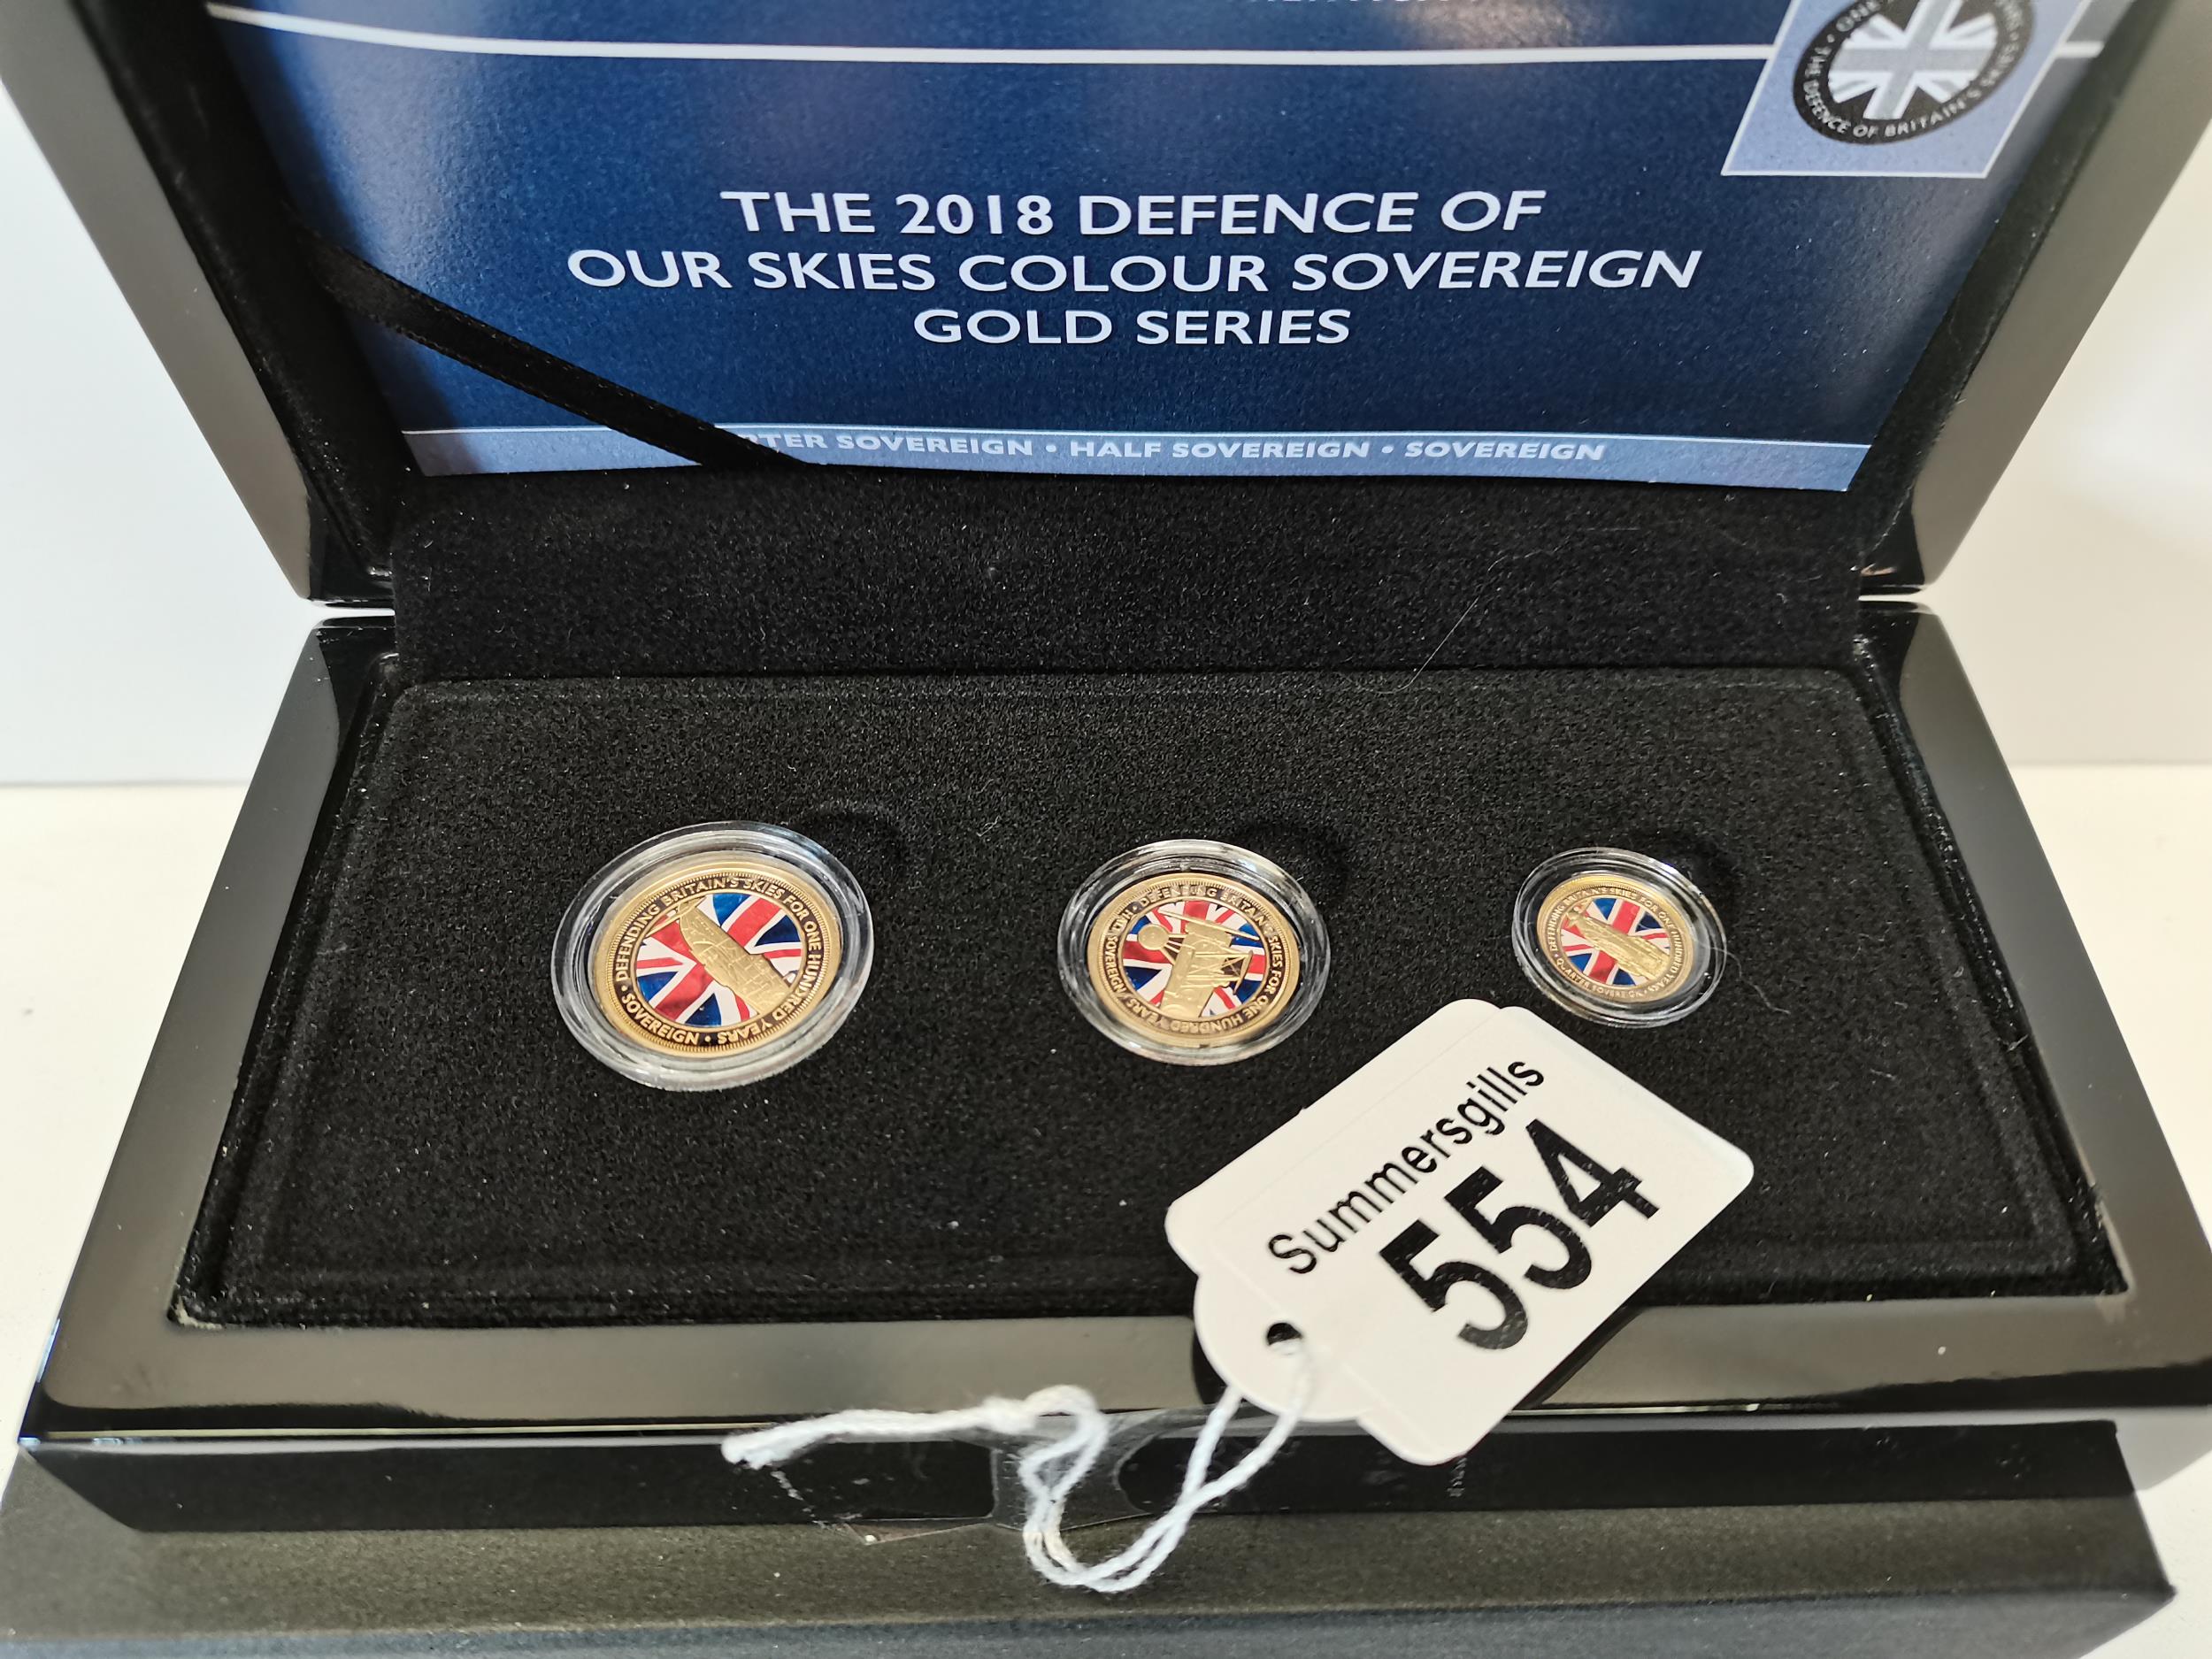 The 2018 defence of the skies coloured sovereign set